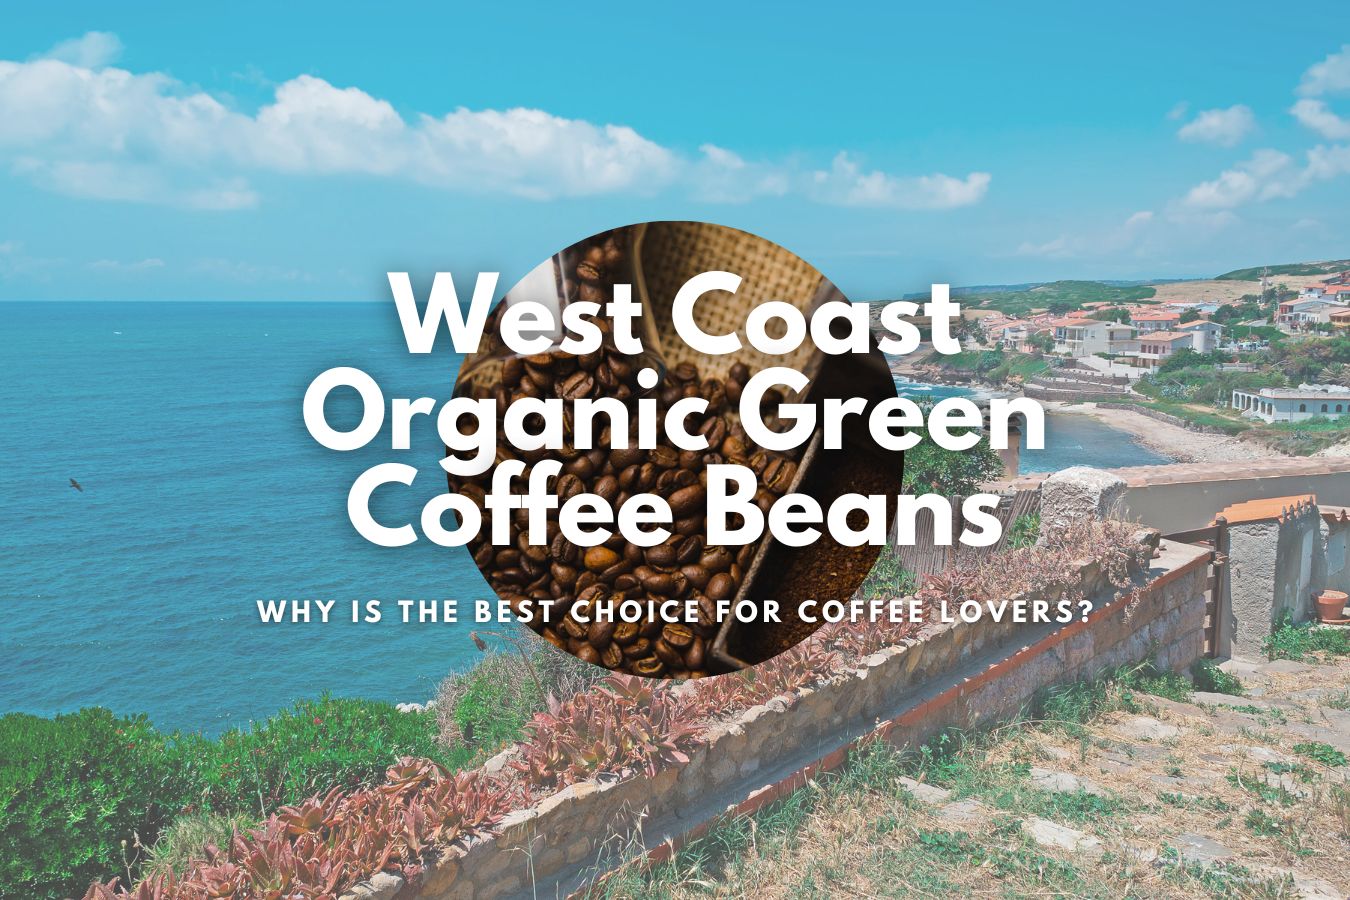 Why West Coast Organic Green Coffee Beans are the Best Choice for Coffee Lovers?